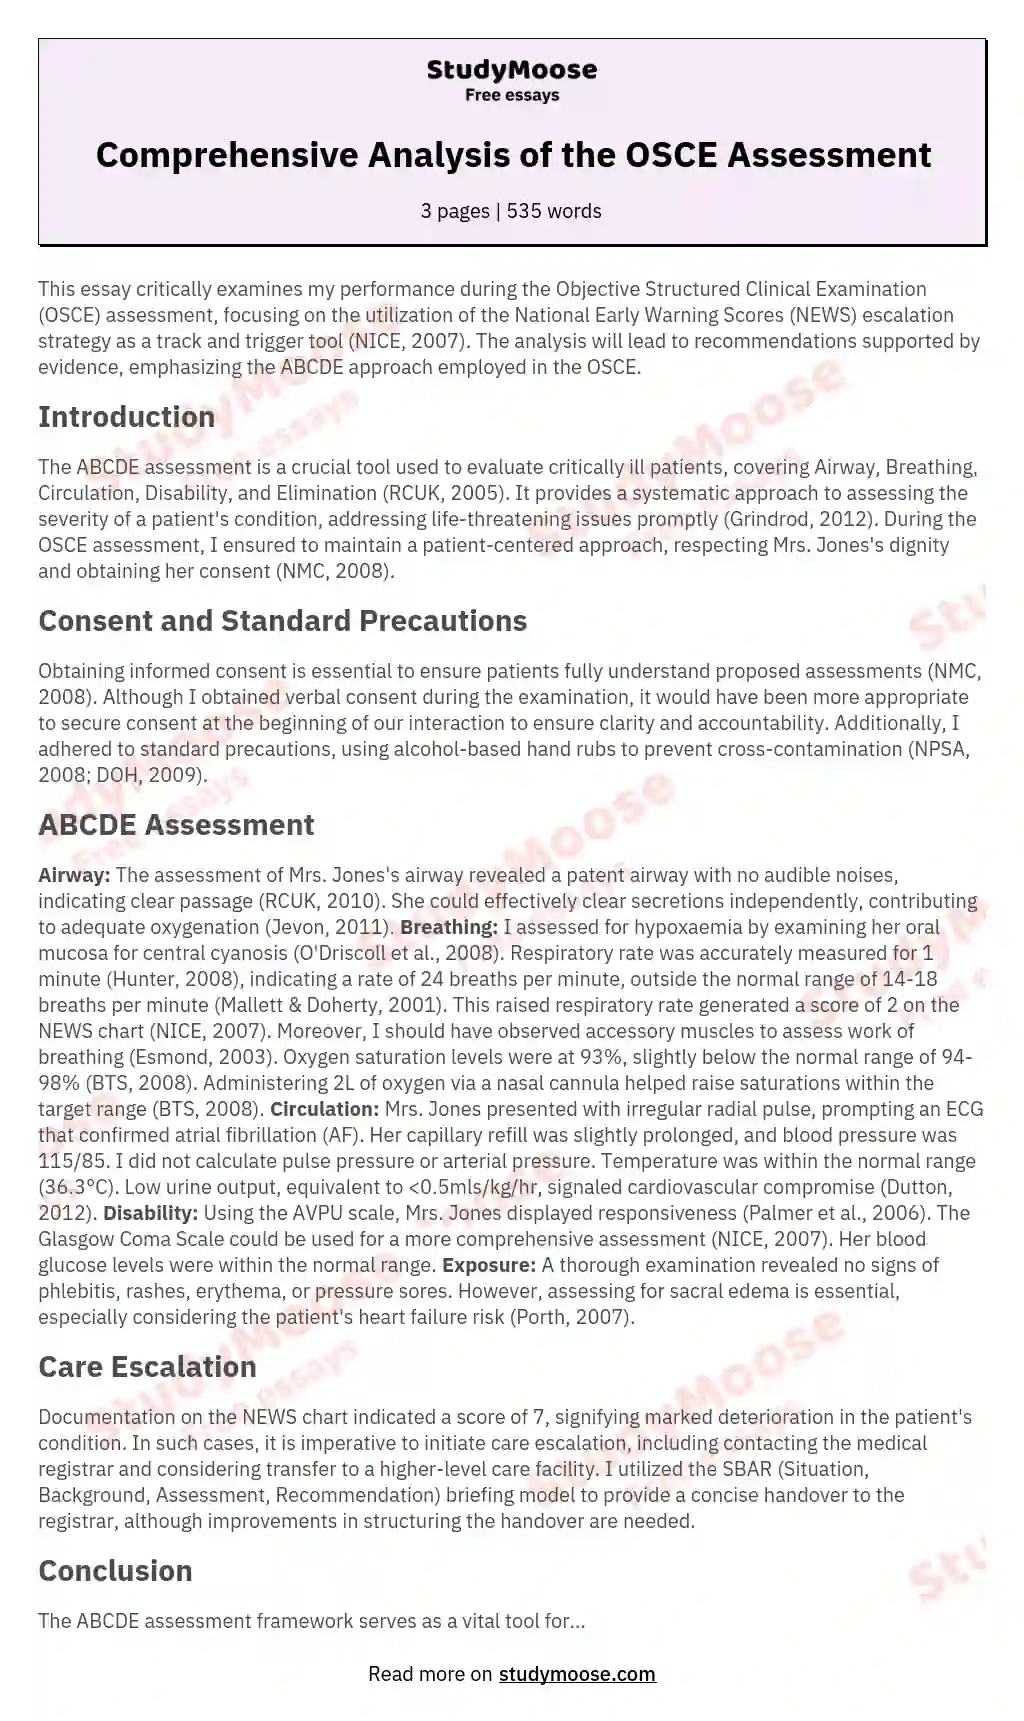 Objective structured clinical examination Assessment of Critically Ill Patient